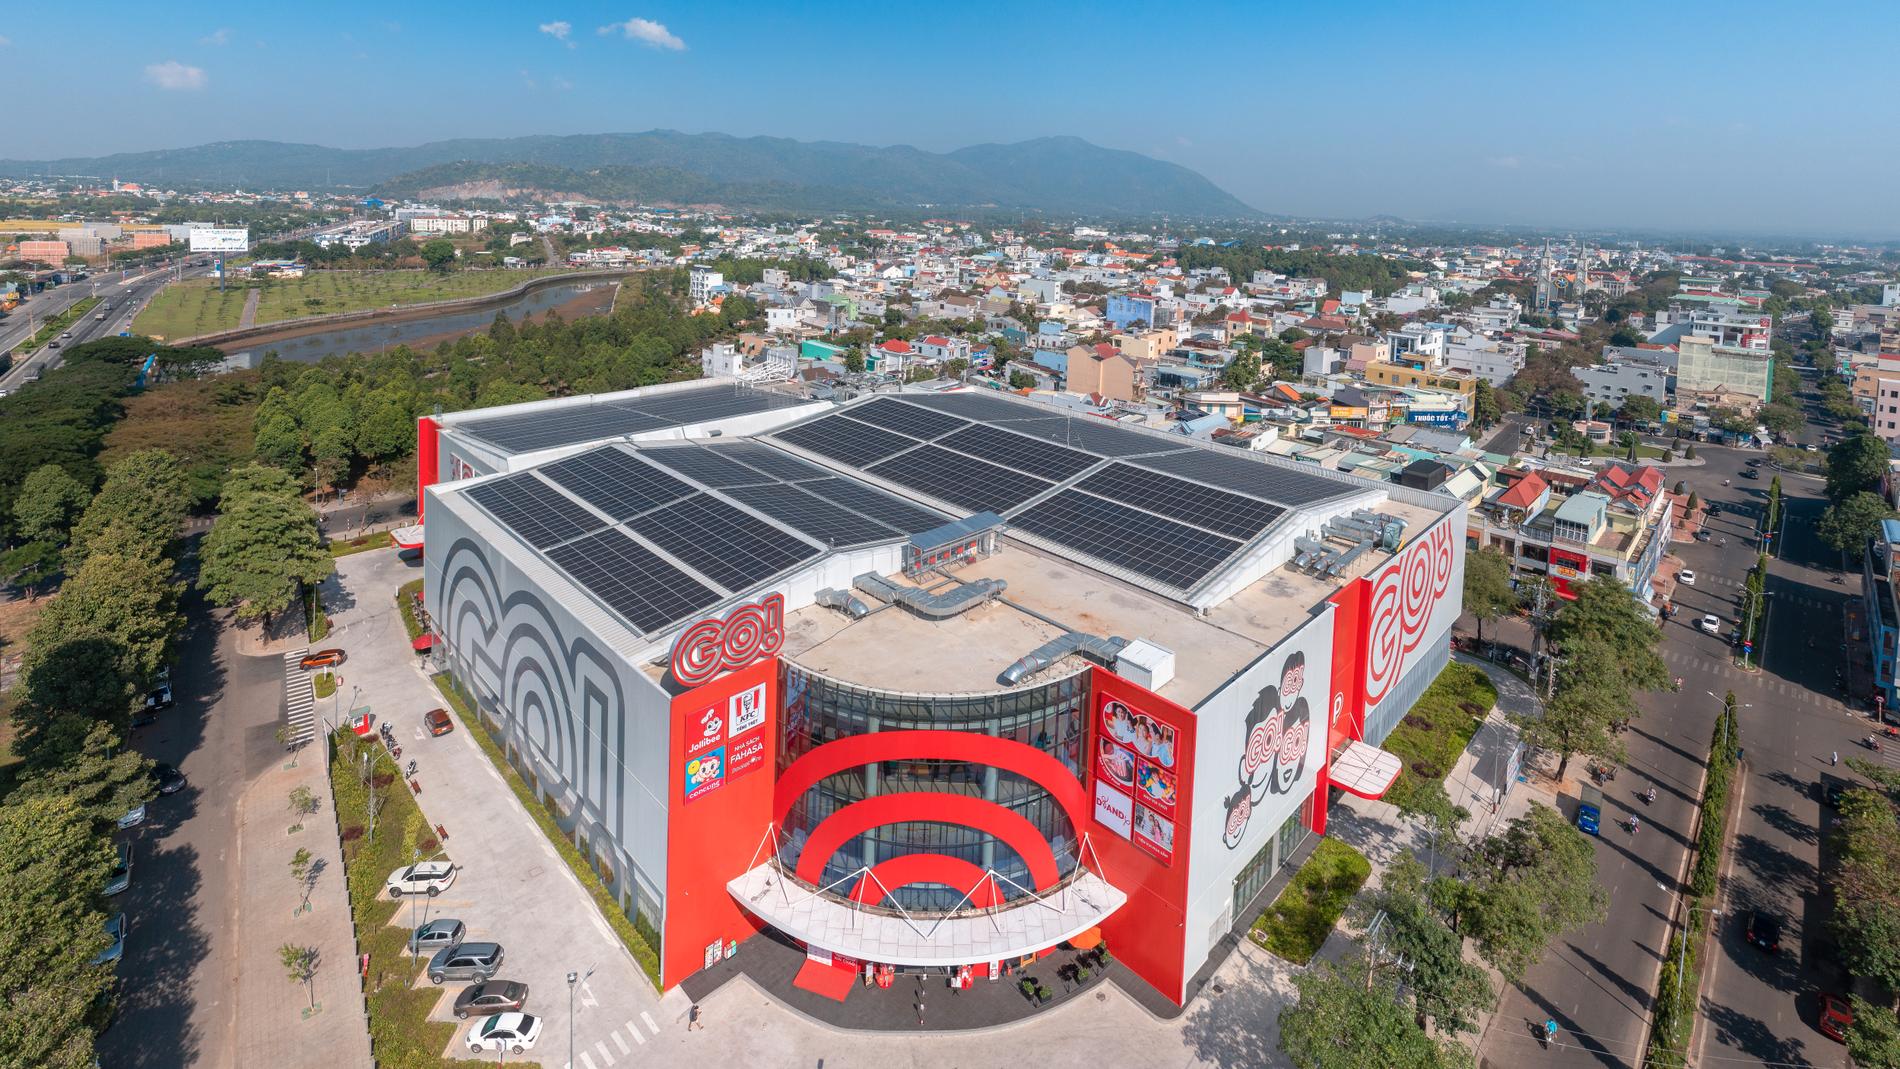 Solar Energy Company from Stavanger participates in the Vietnam initiative - E24